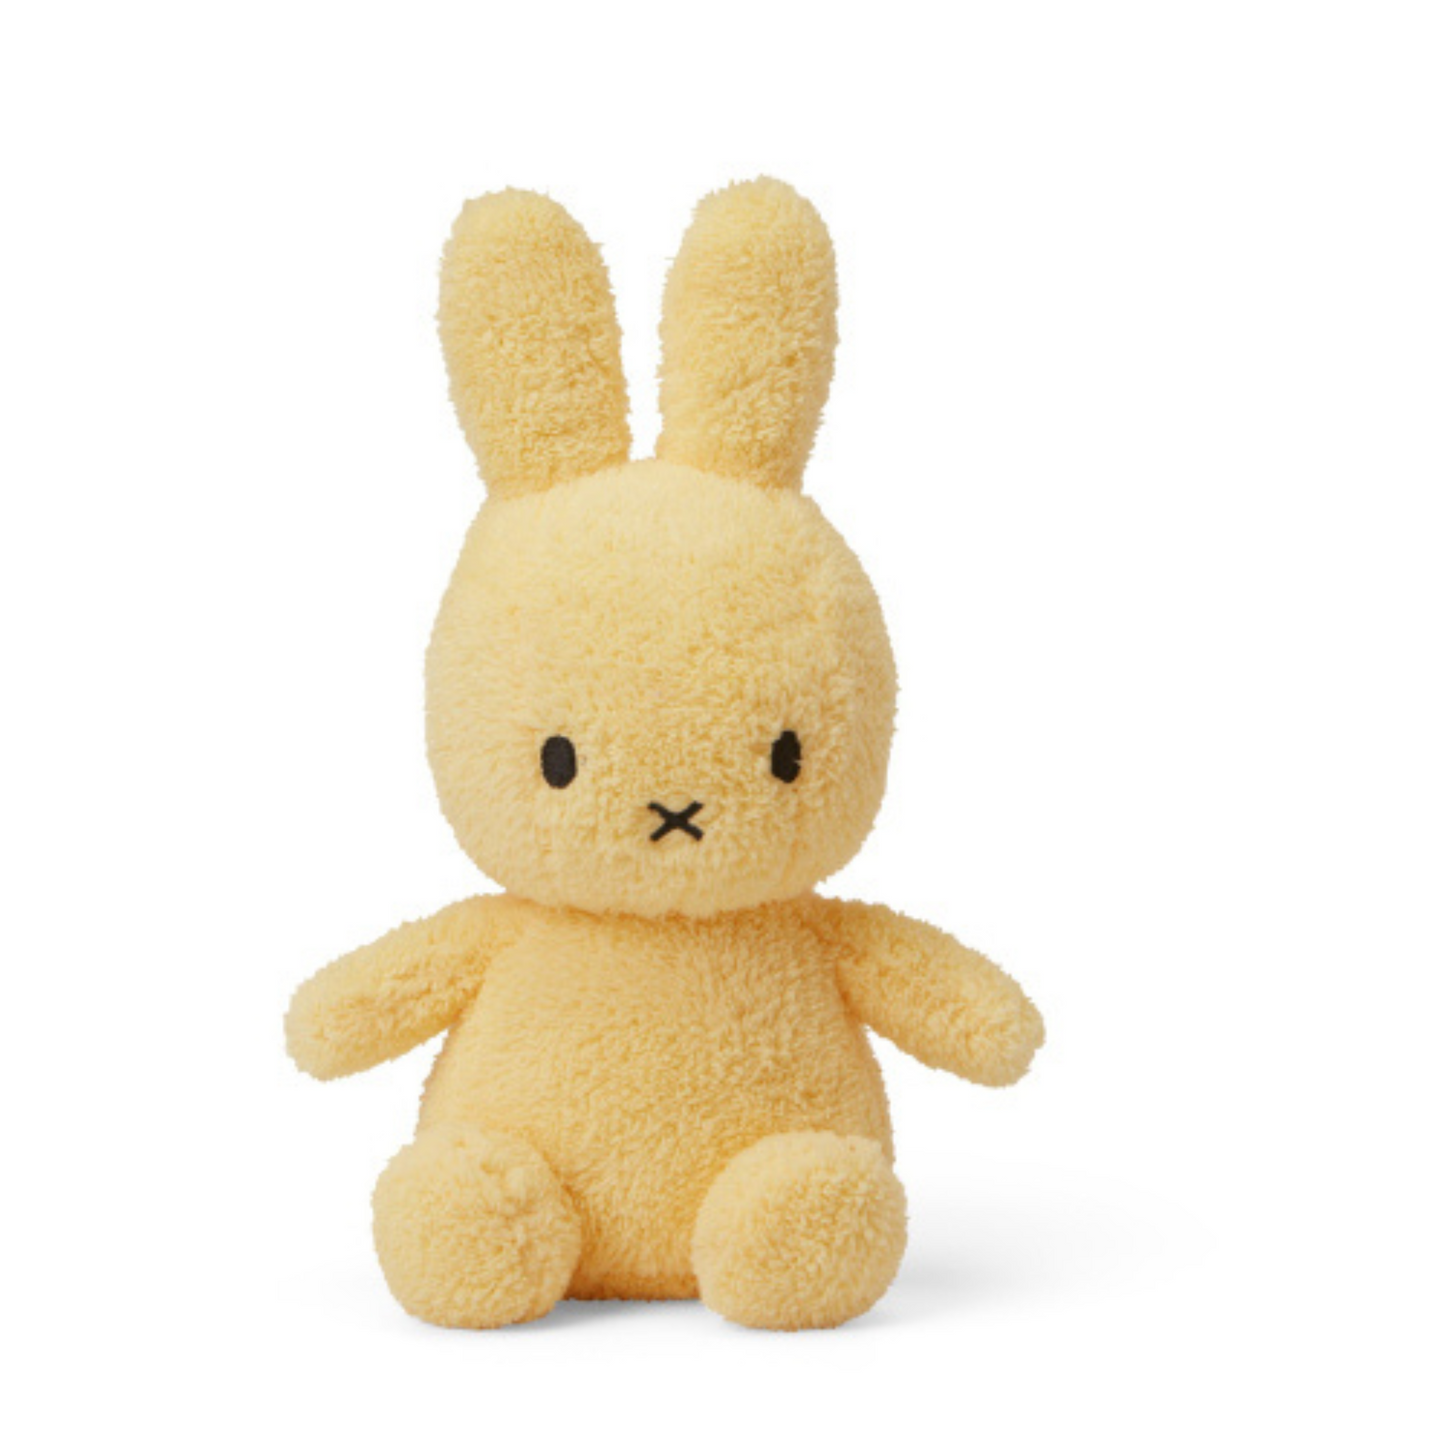 Personalized Miffy Soft Toy with Name - 4 Colors (33cm)